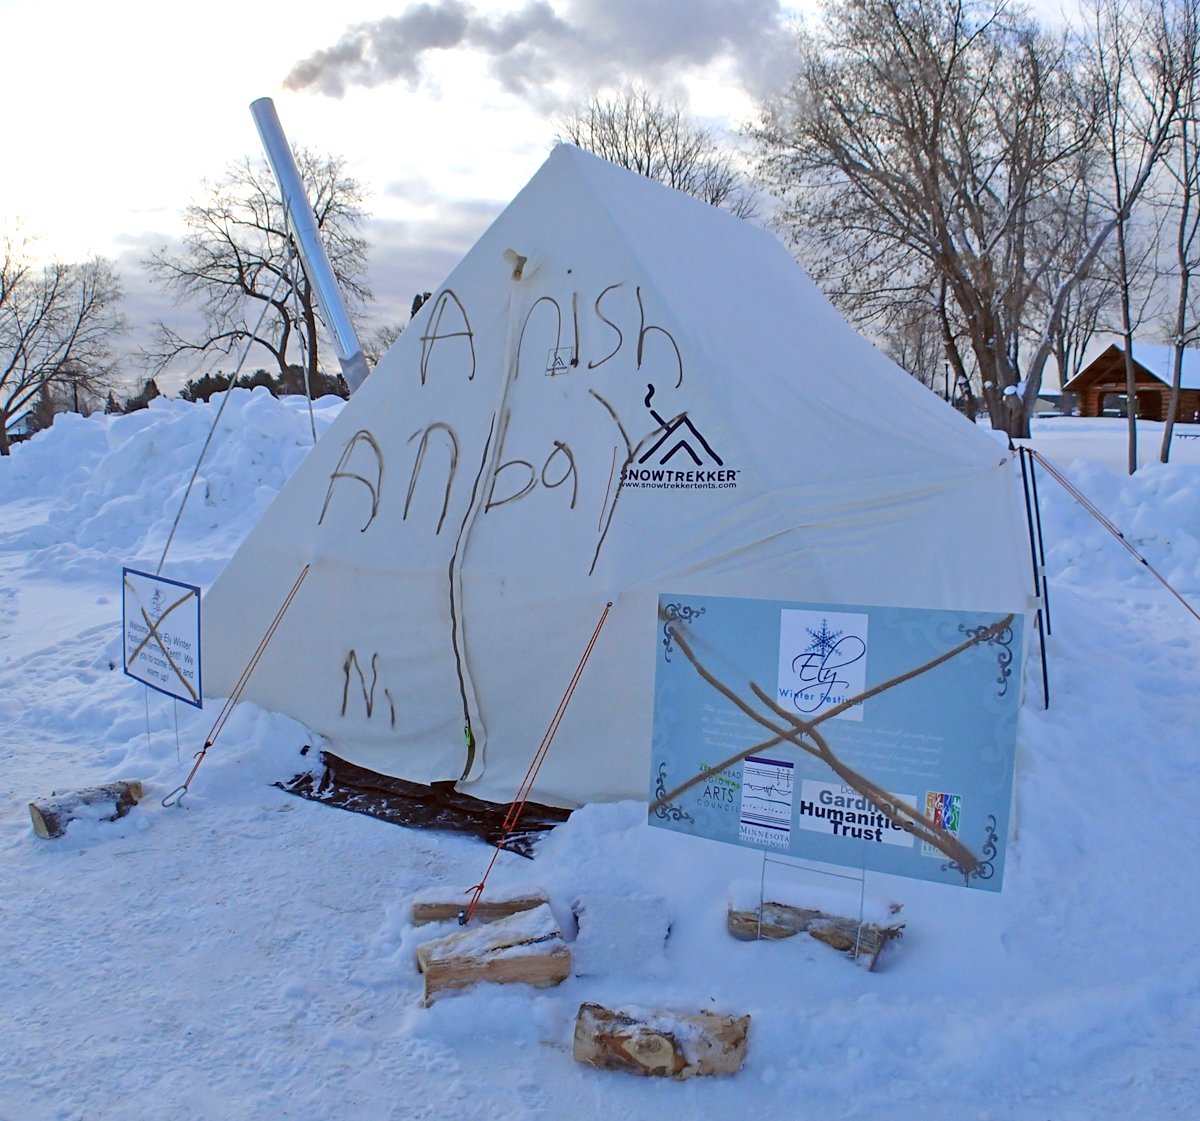 Spray paint damage mars a warming tent and sign in Whiteside Park.